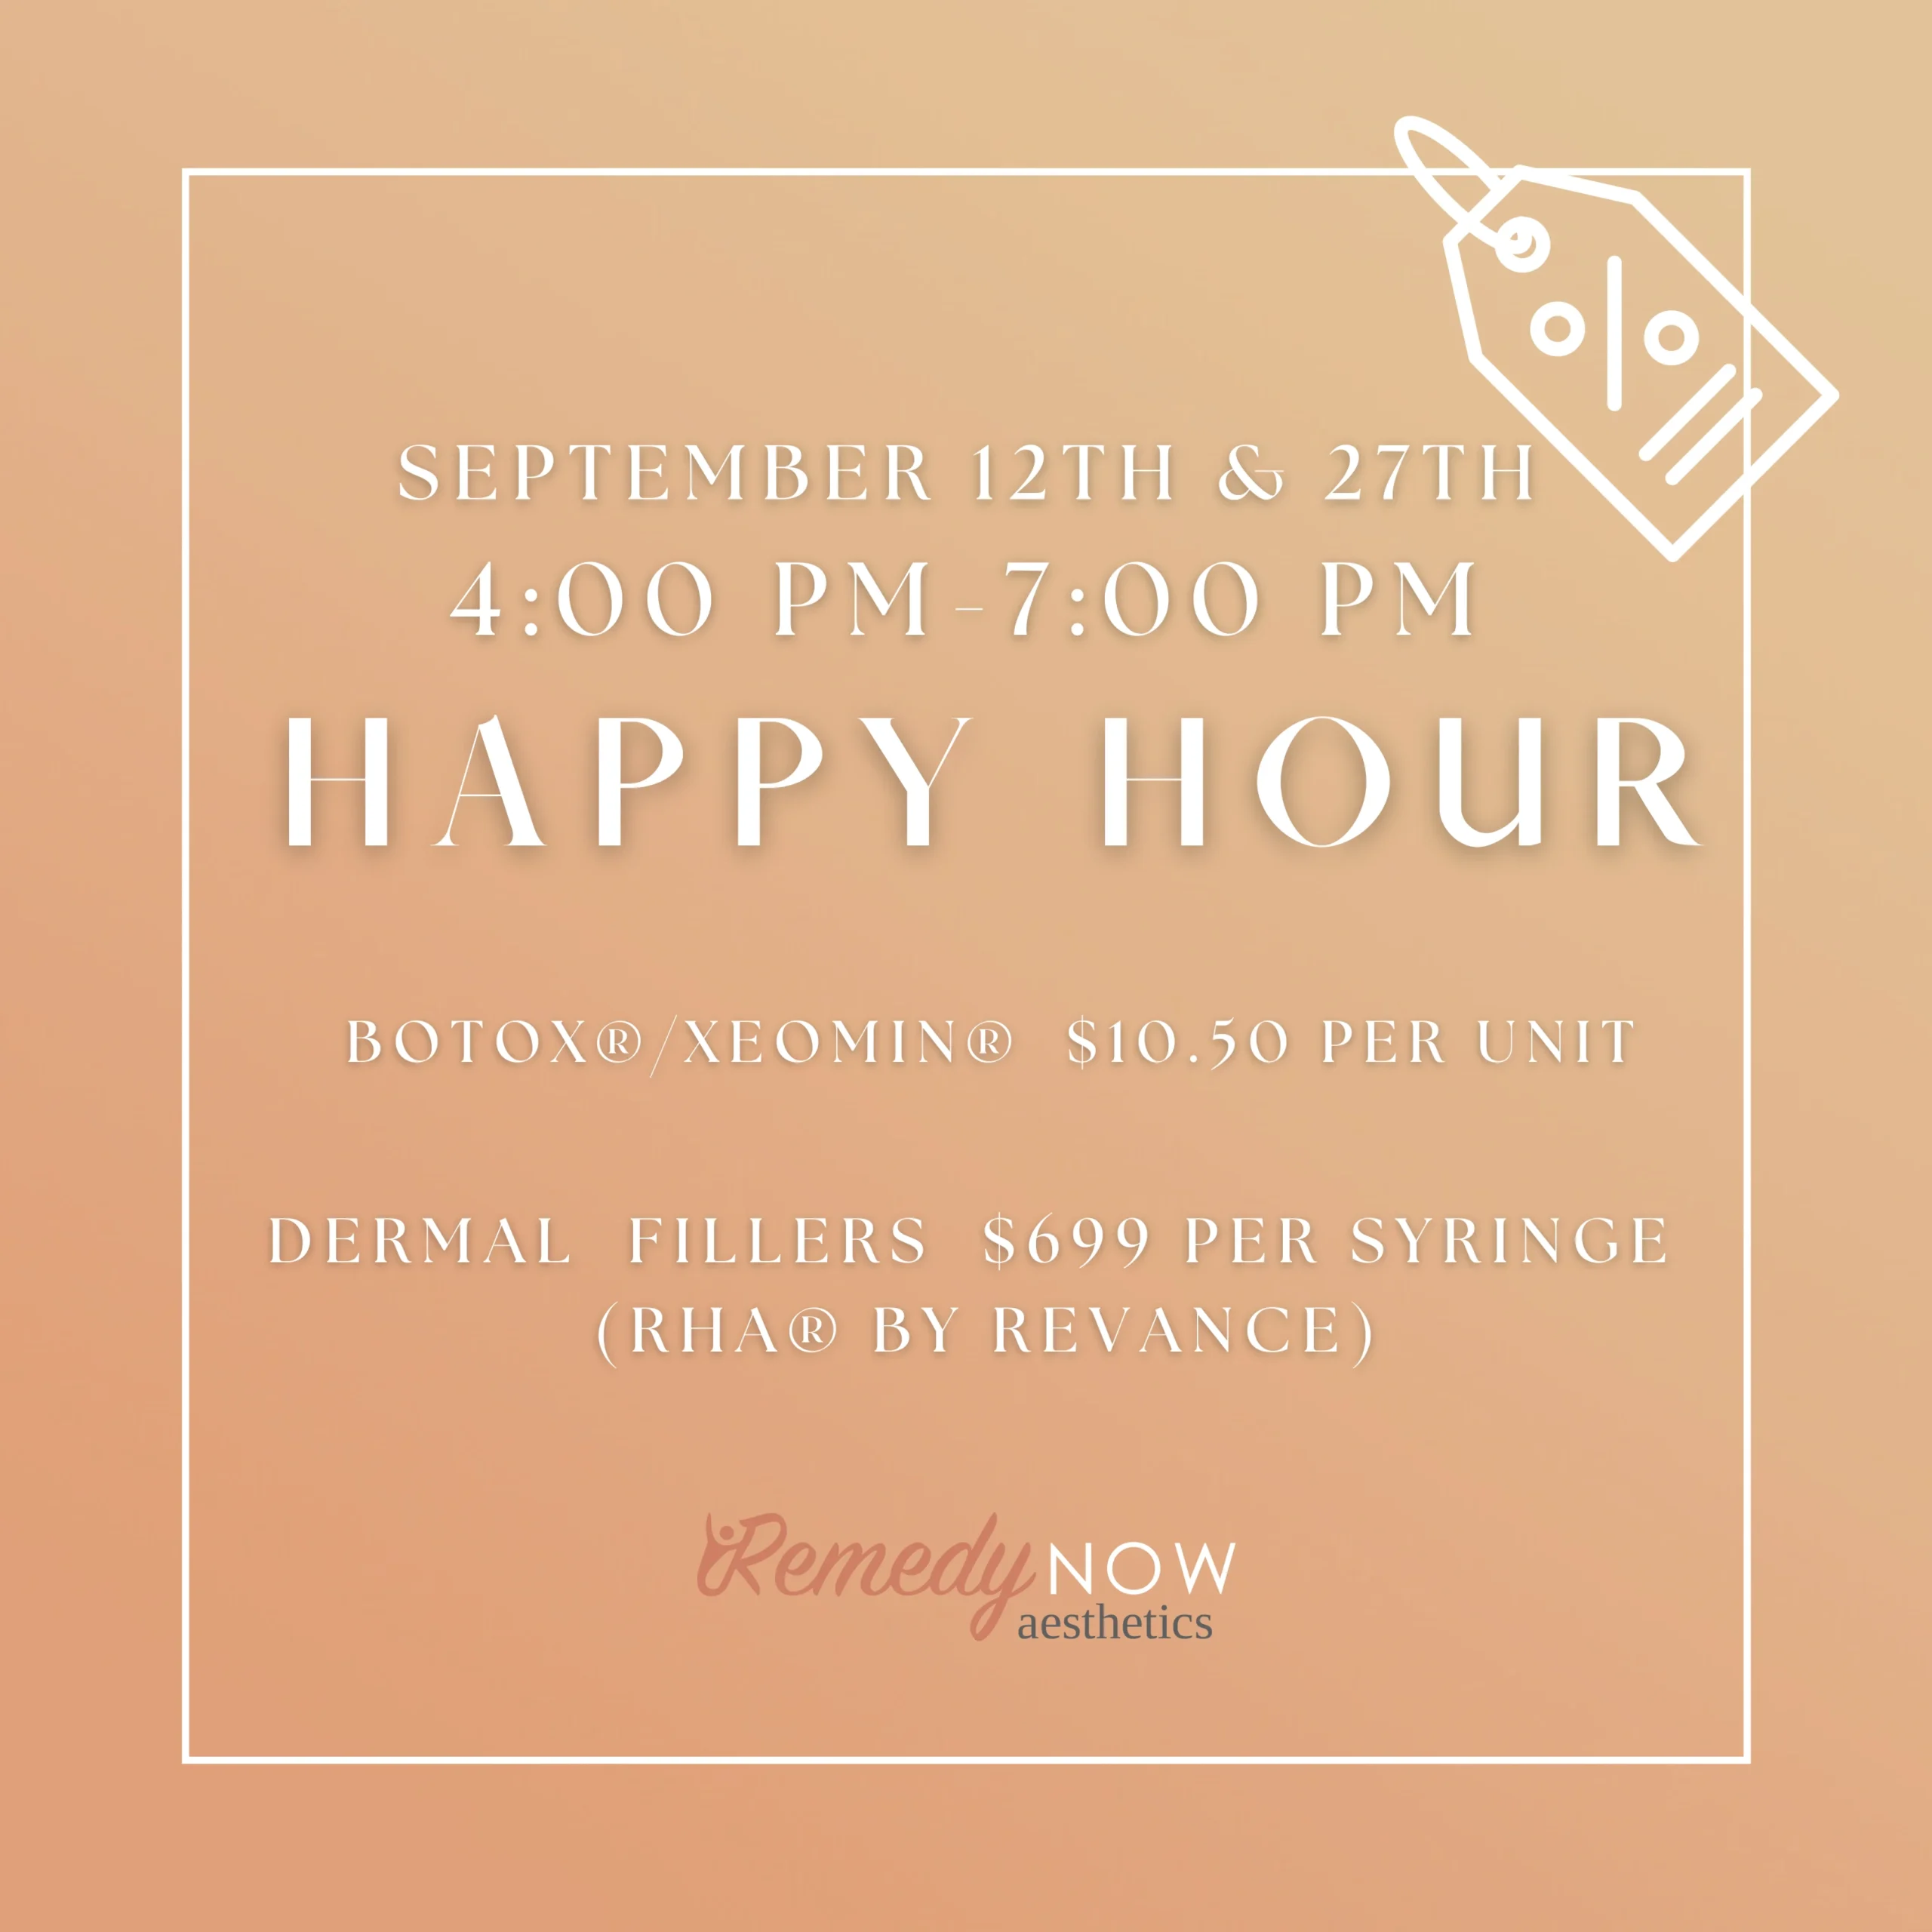 Happy Hour - September 12th & 27th 5:00 PM 7:00 PM 